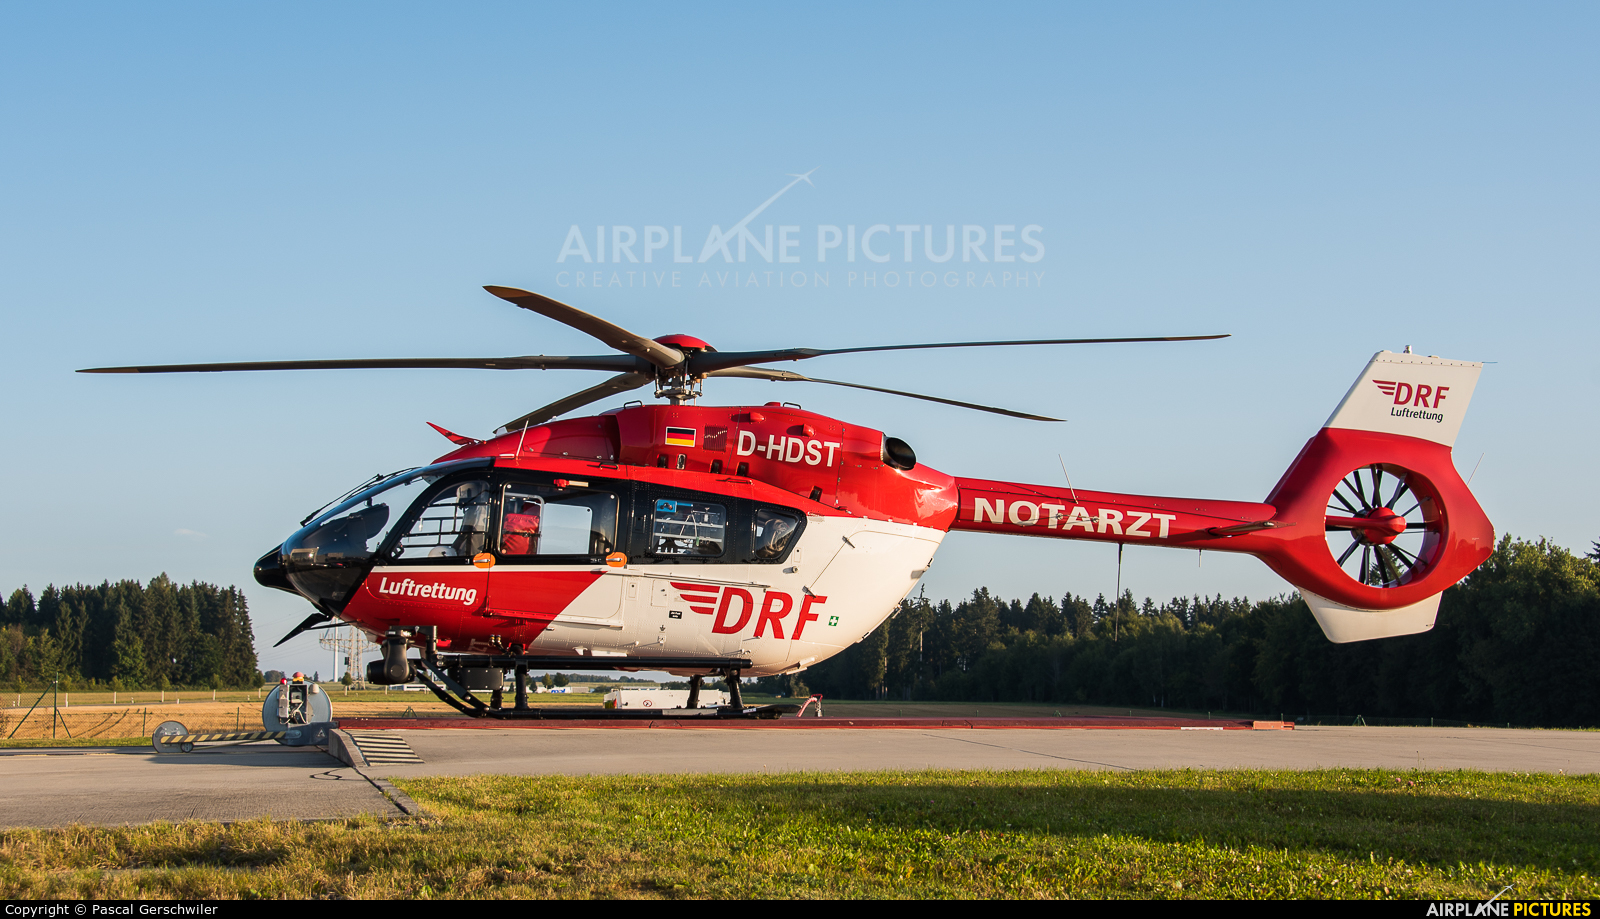 DRF Luftrettung D-HDST aircraft at Off Airport - Germany